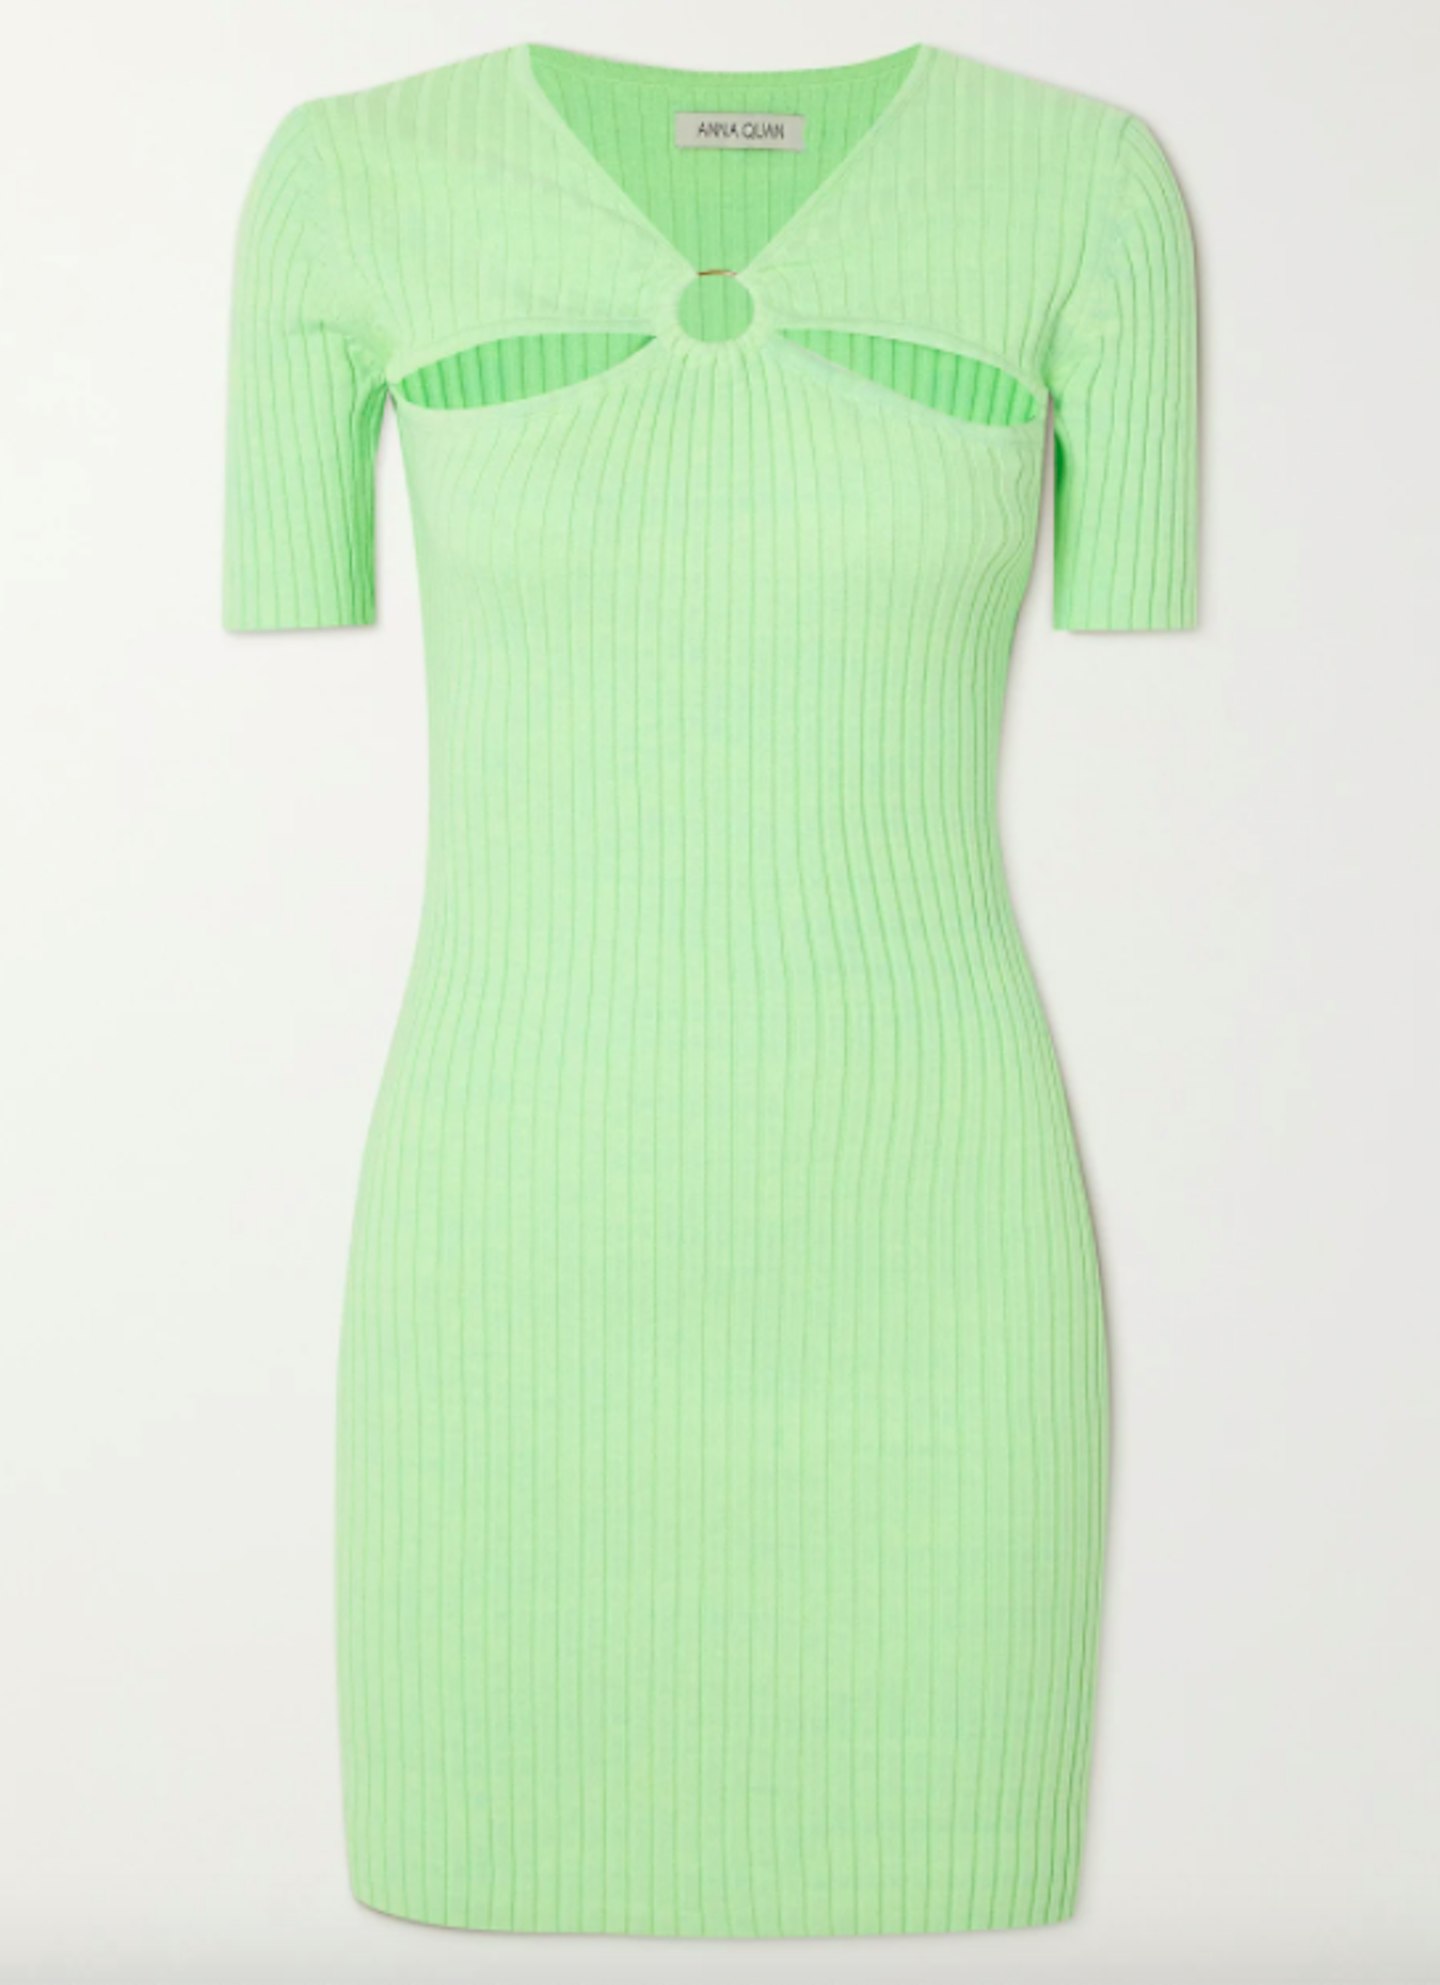 Anna Quan, Sierra Cut-Out Embellished Ribbed Cotton Mini Dress, £340